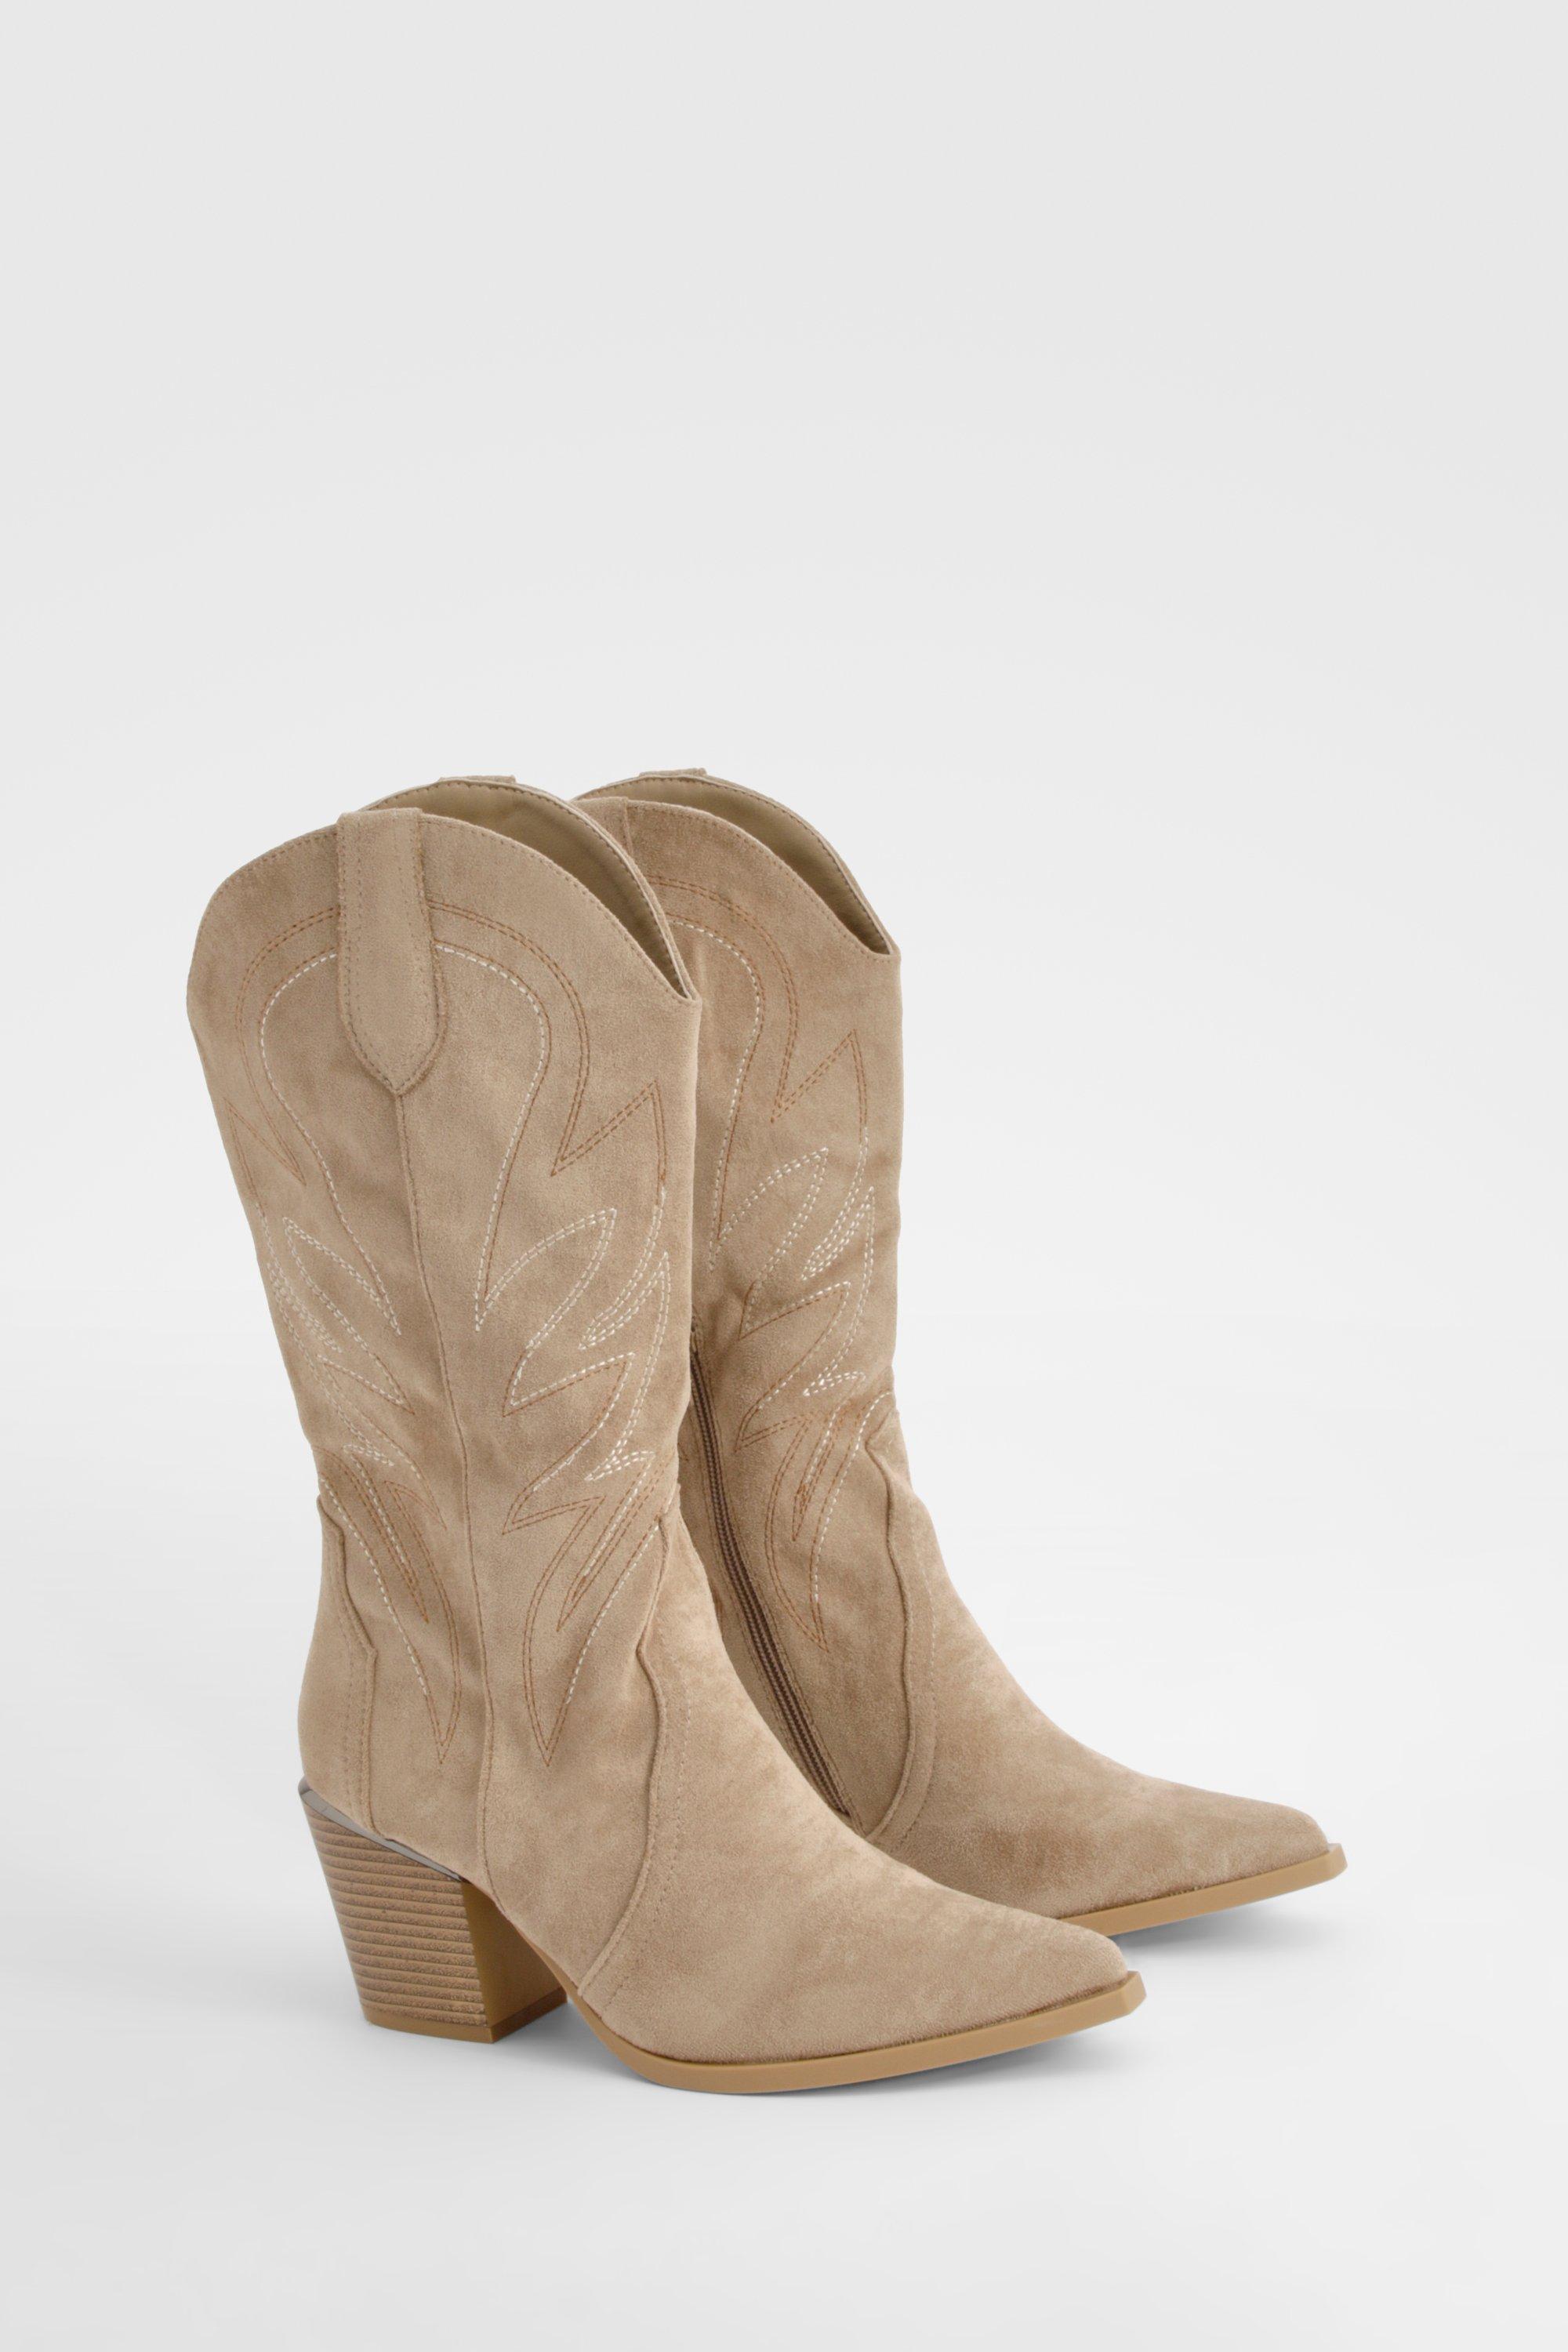 Boohoo Embroidered Knee High Western Boots, Taupe